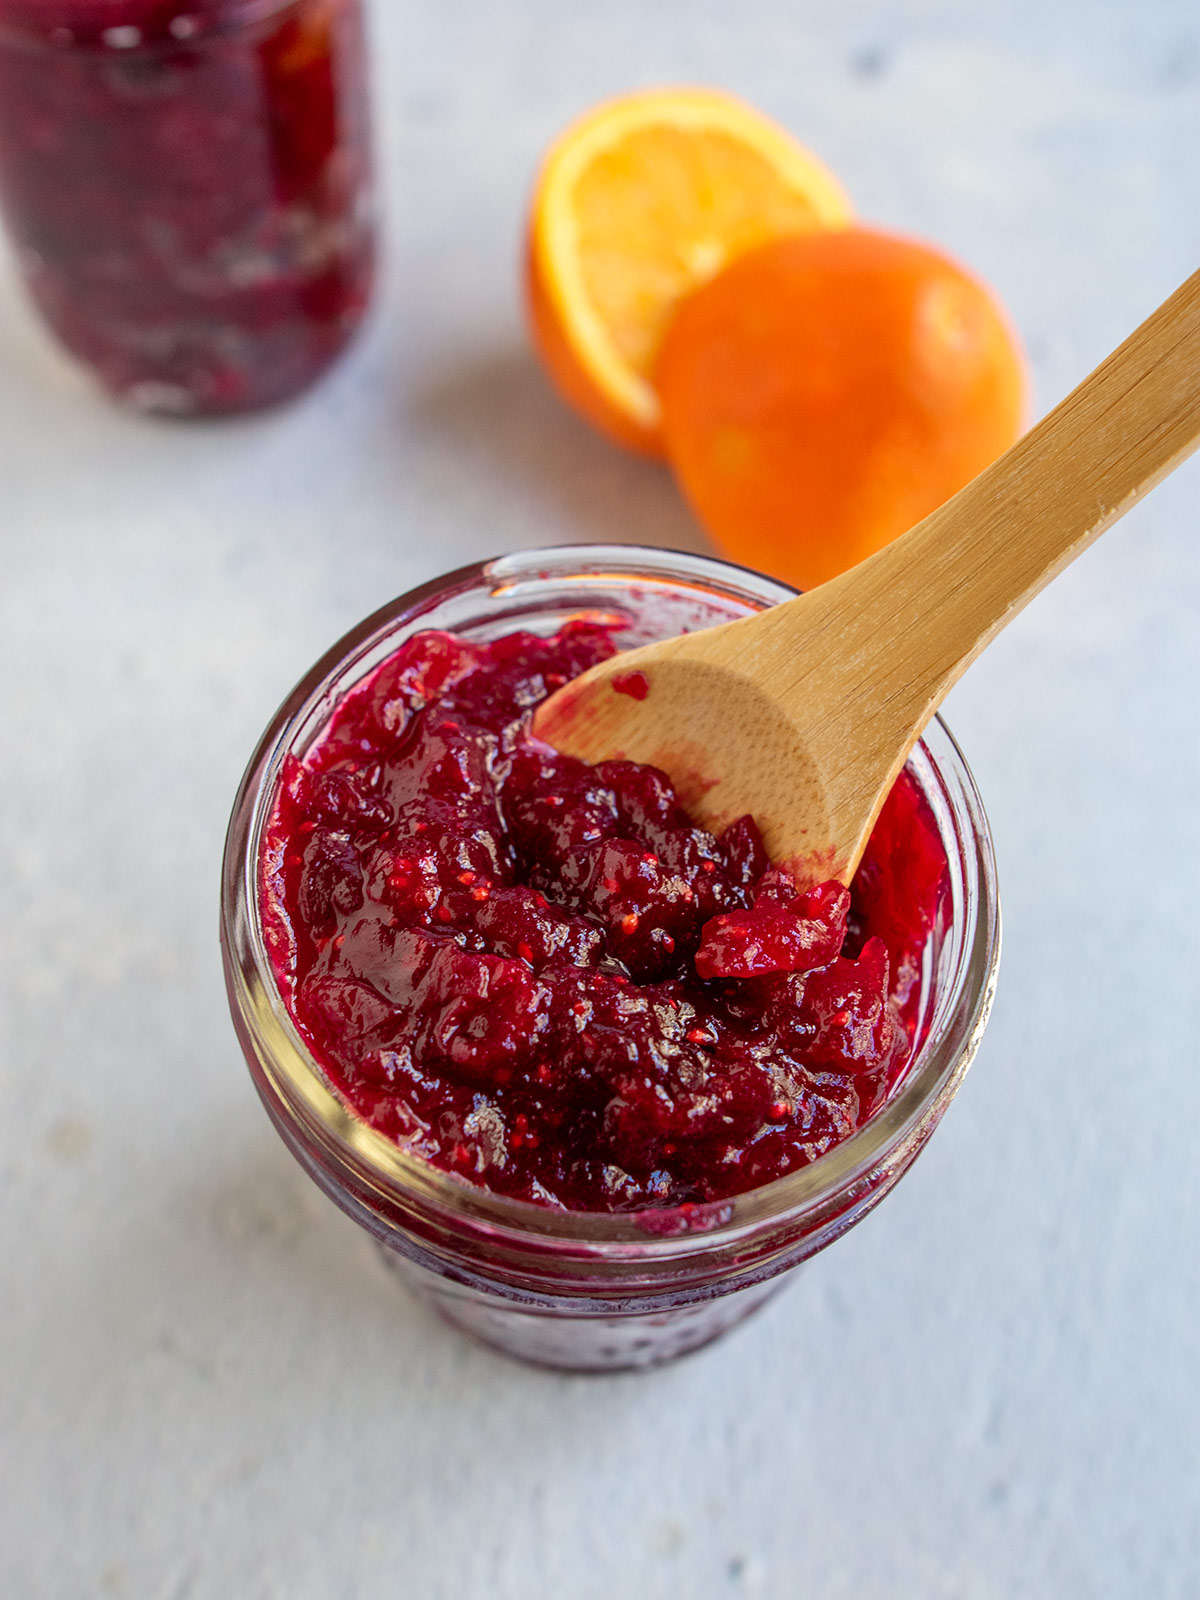 Jar of cranberry orange jam with a wooden spoon and a cut orange in the background on a light blue mat.